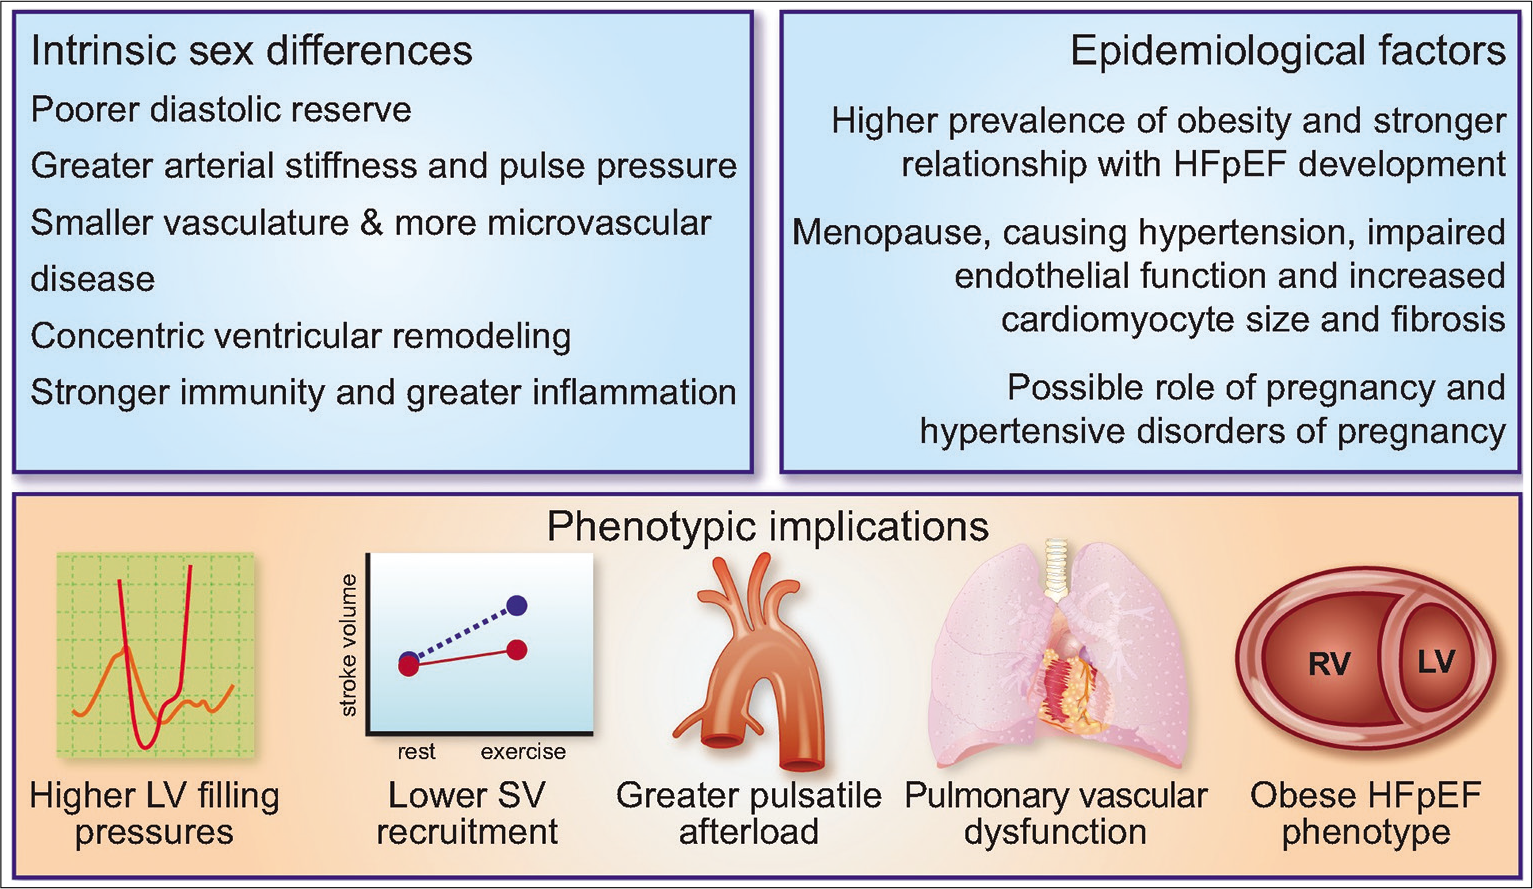 Factors contributing for gender differences in HF – epidemiological factors, phenotypic implications, and intrinsic sex difference.